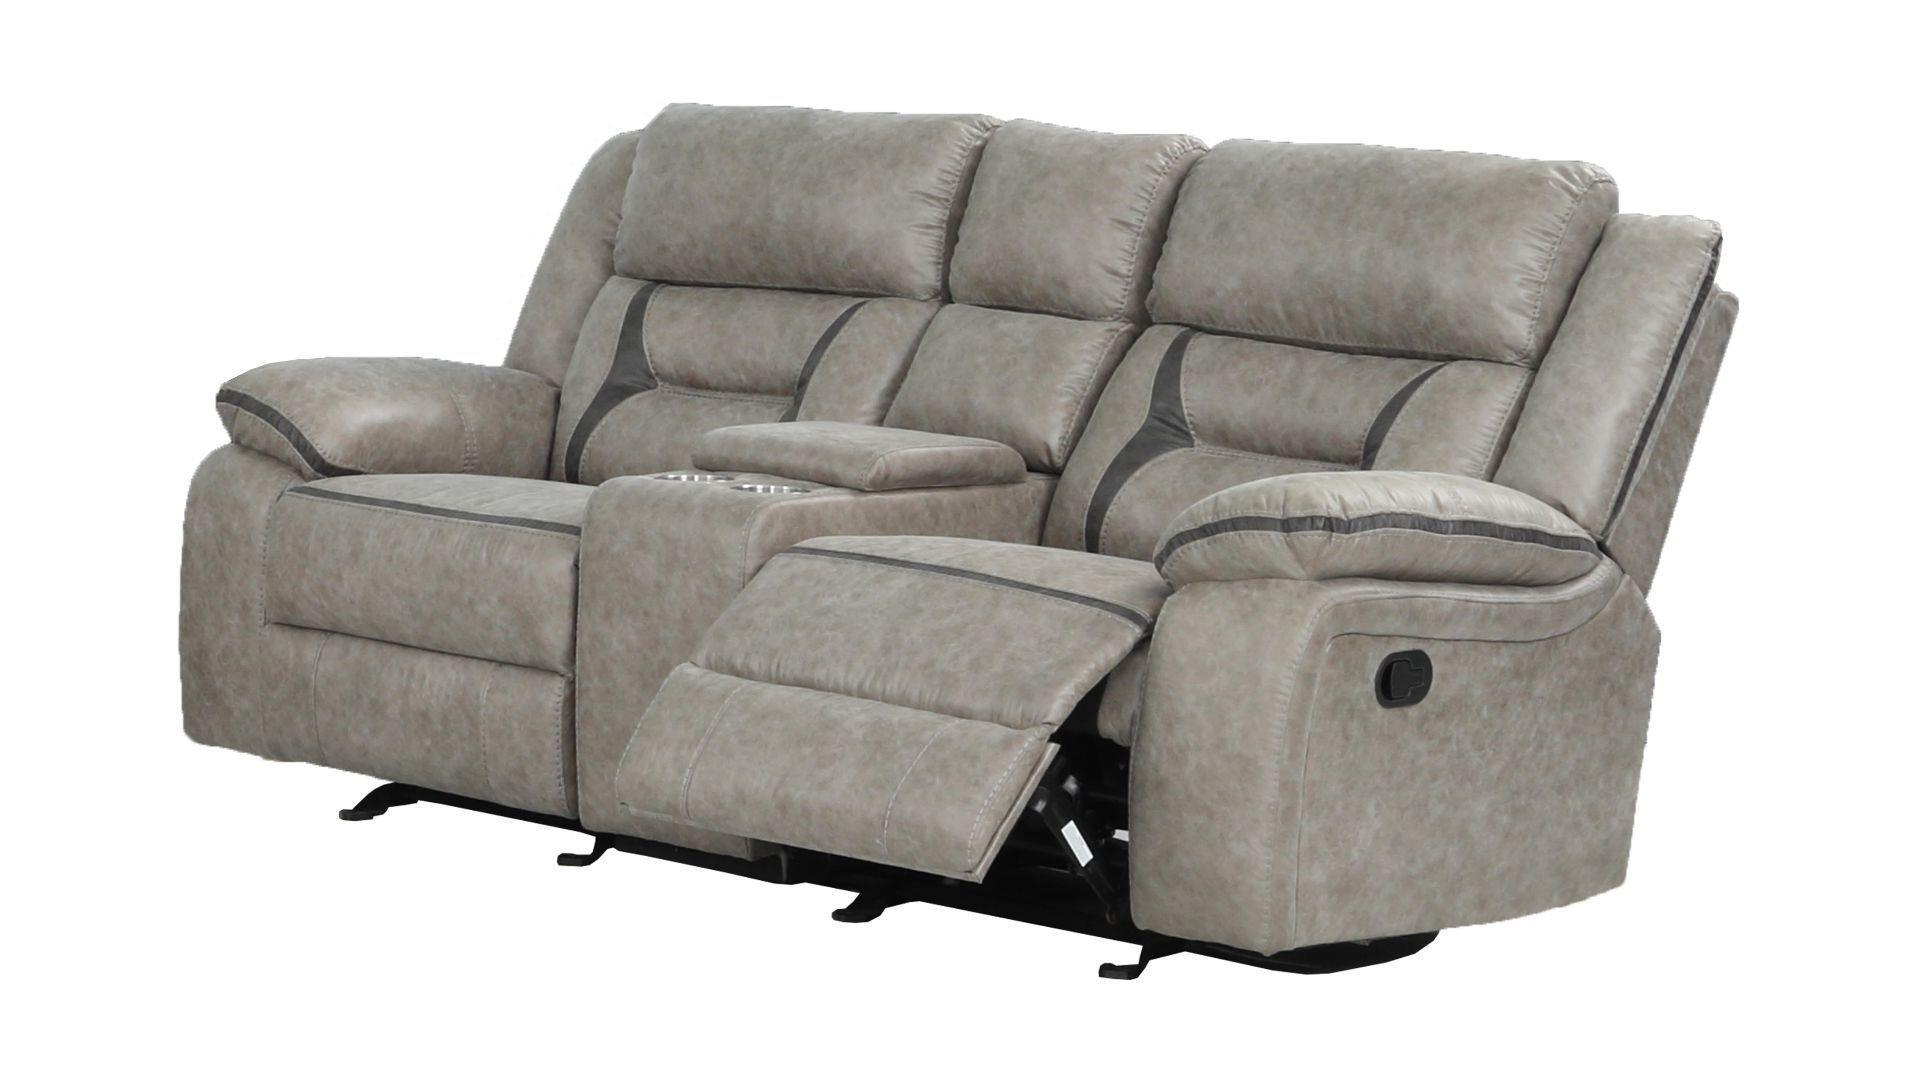 Contemporary, Modern Recliner Loveseat DENALI 698781196557 in Gray Faux Leather